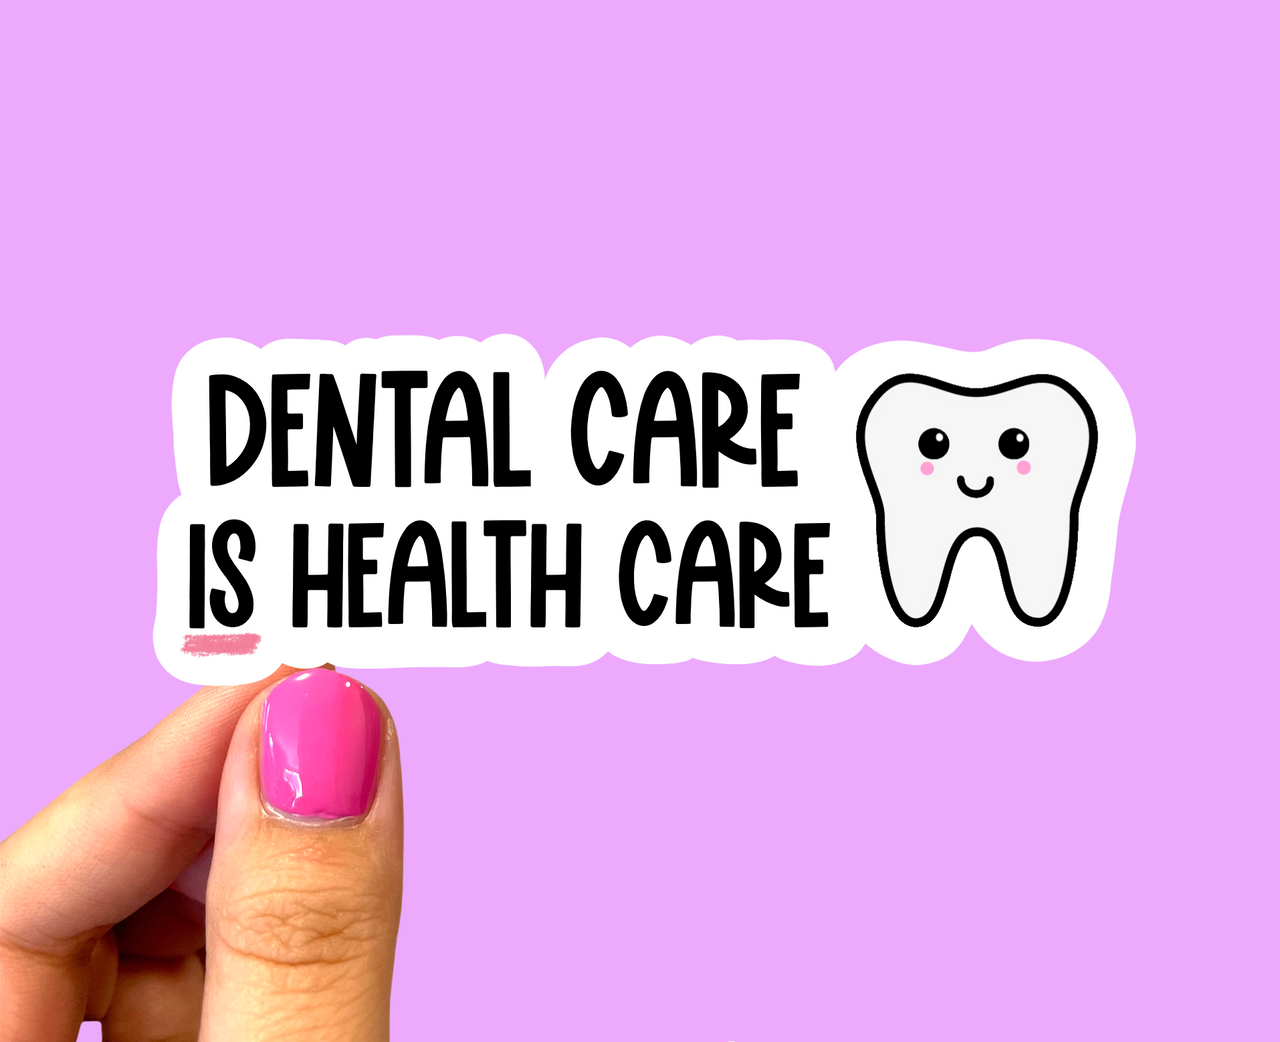 Dental care is health care